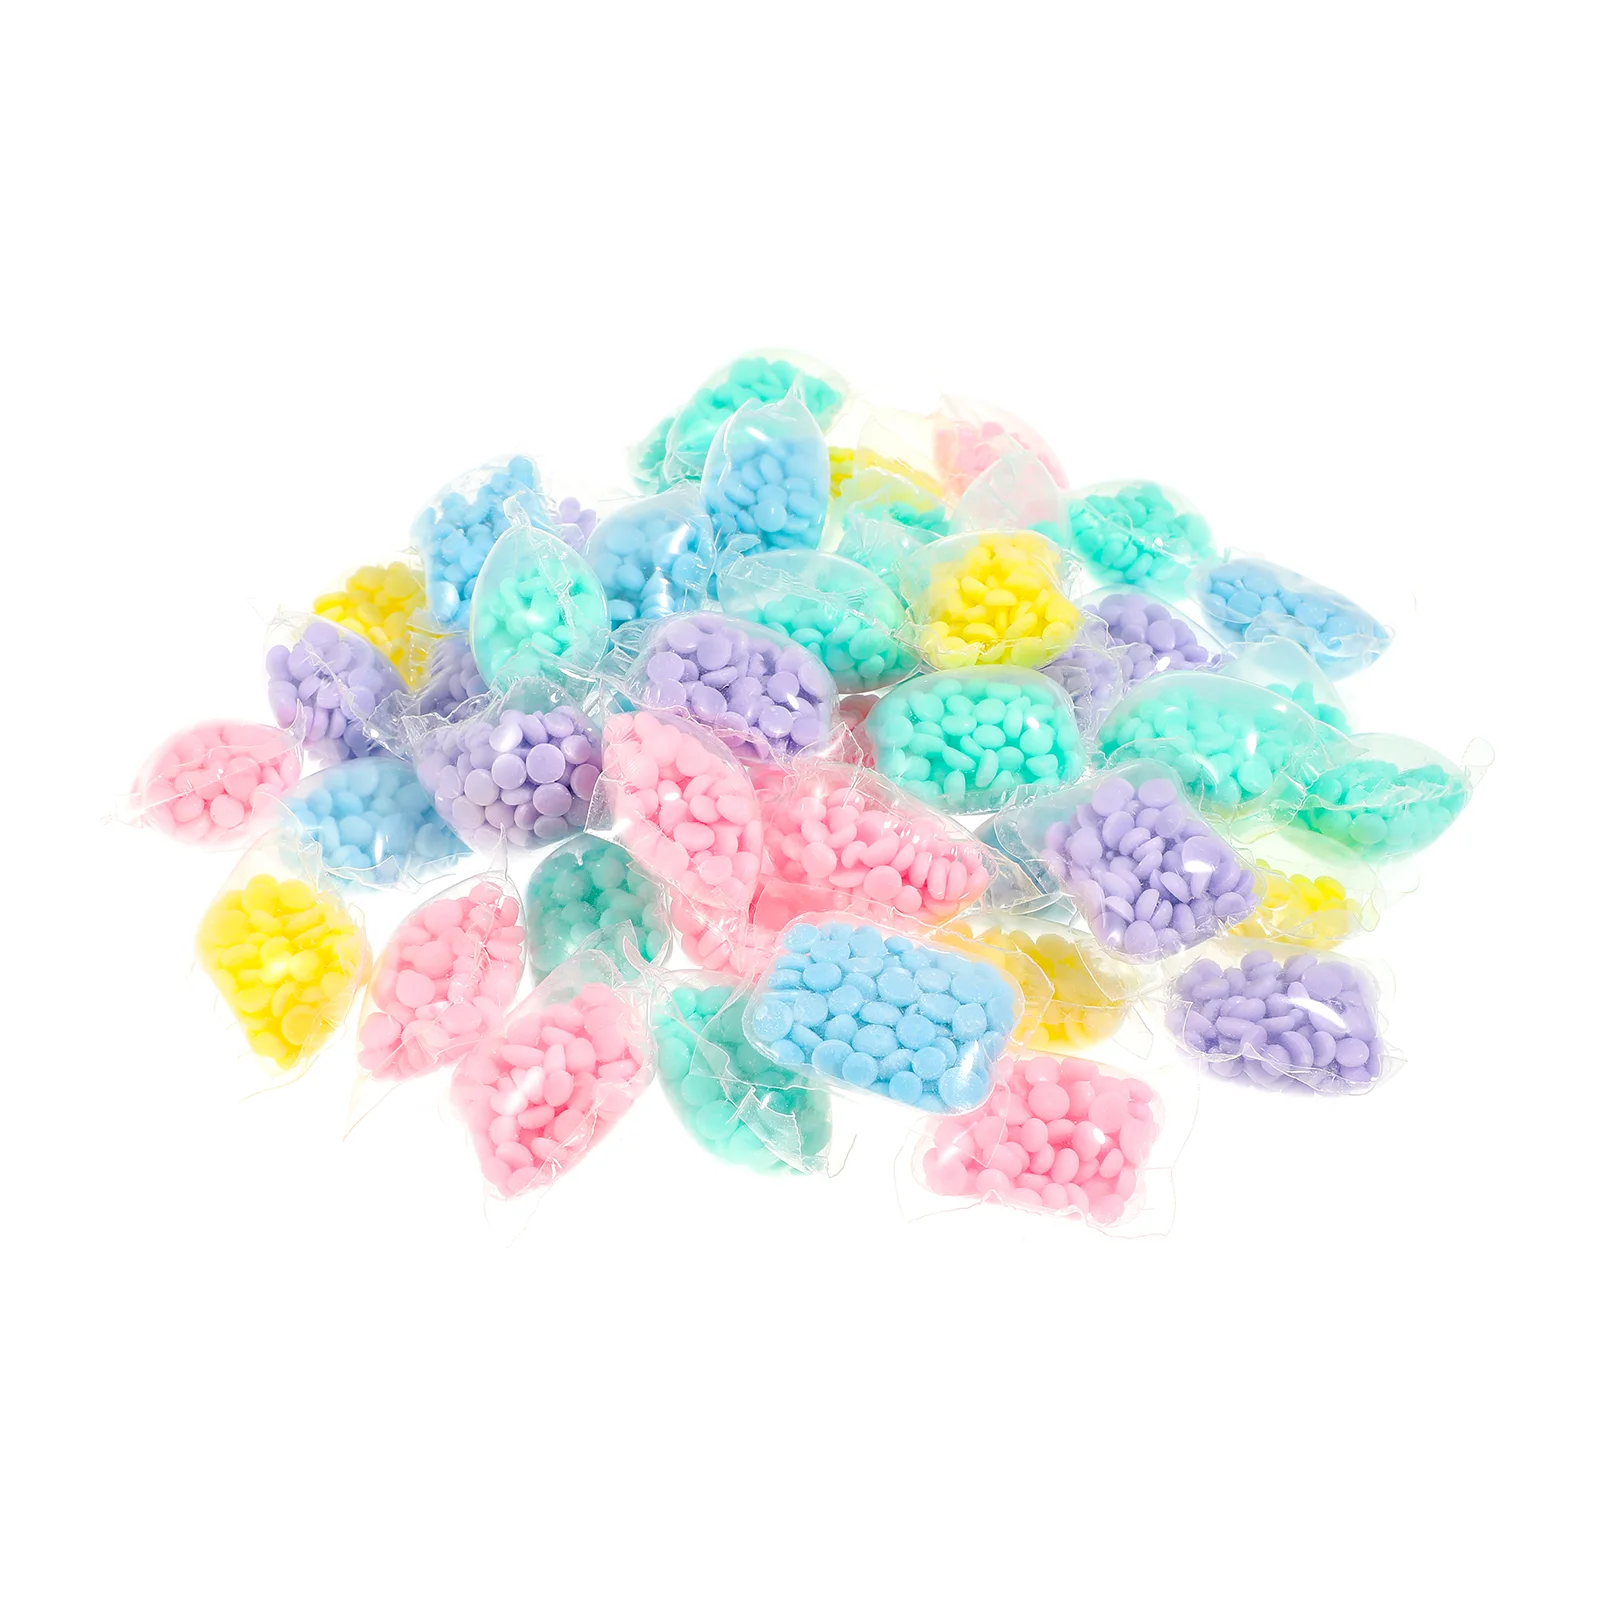 

50 Pcs Fragrance Condensate Beads Laundry Scent Boosters Baby Washing Machine Washer Liquid Softener Fresh